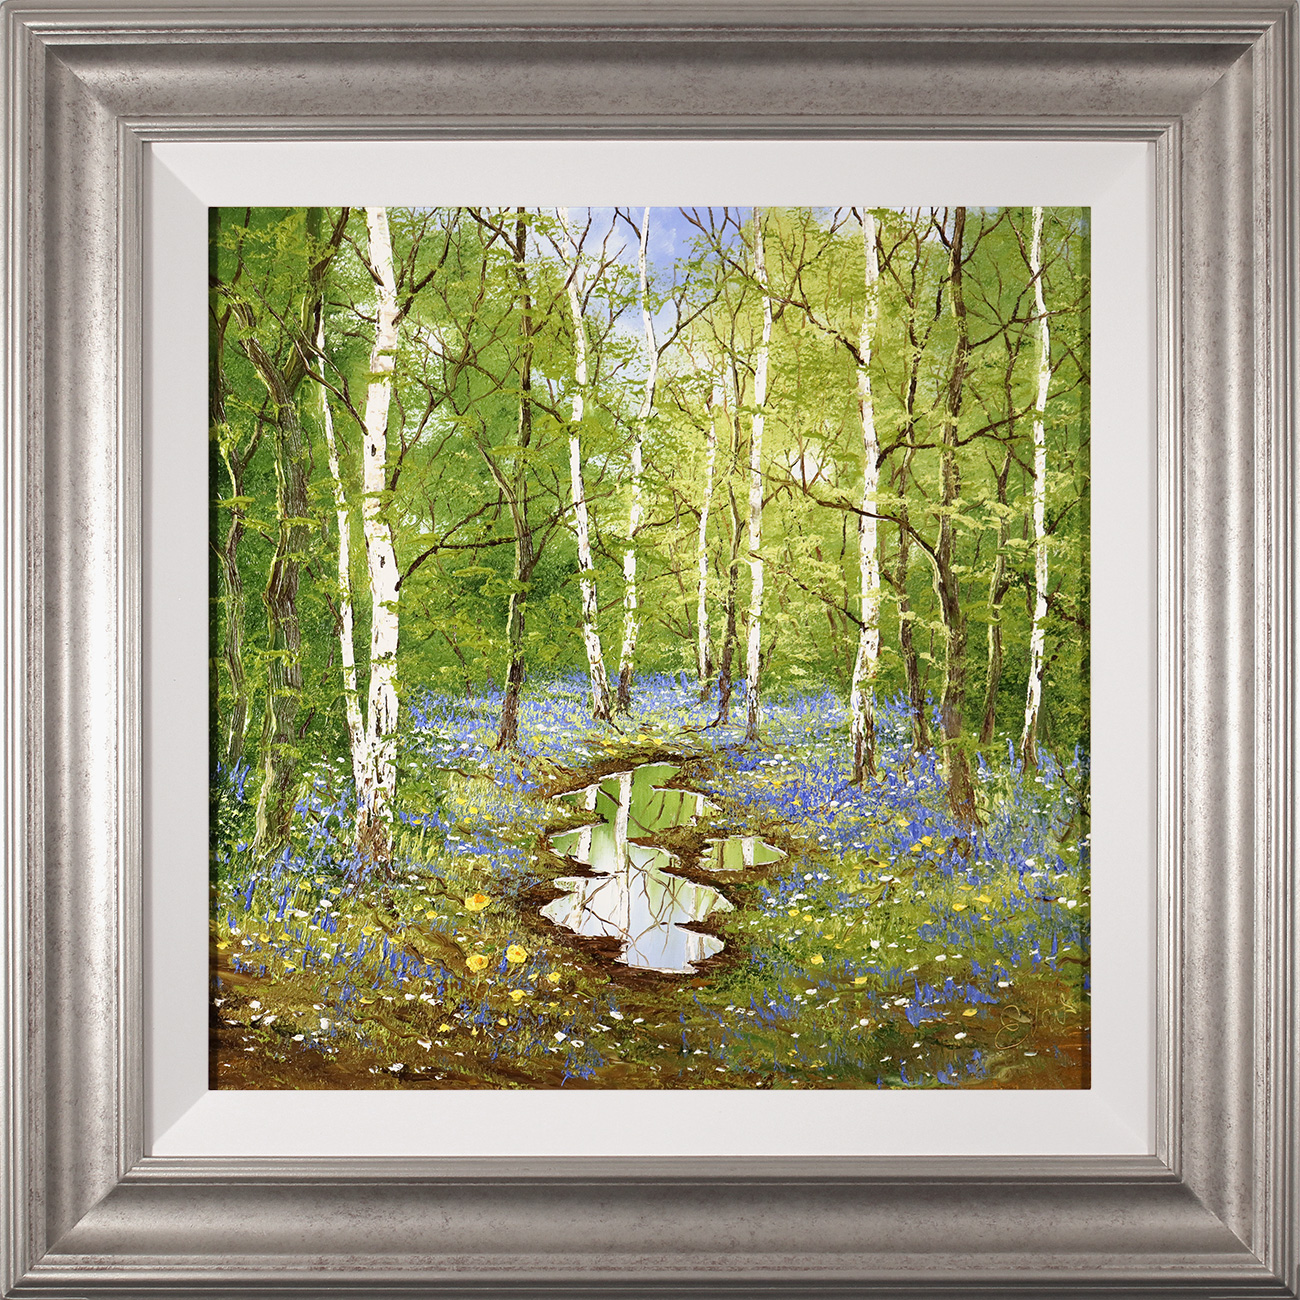 Terry Evans, Original oil painting on canvas, The Bluebell Wood, click to enlarge